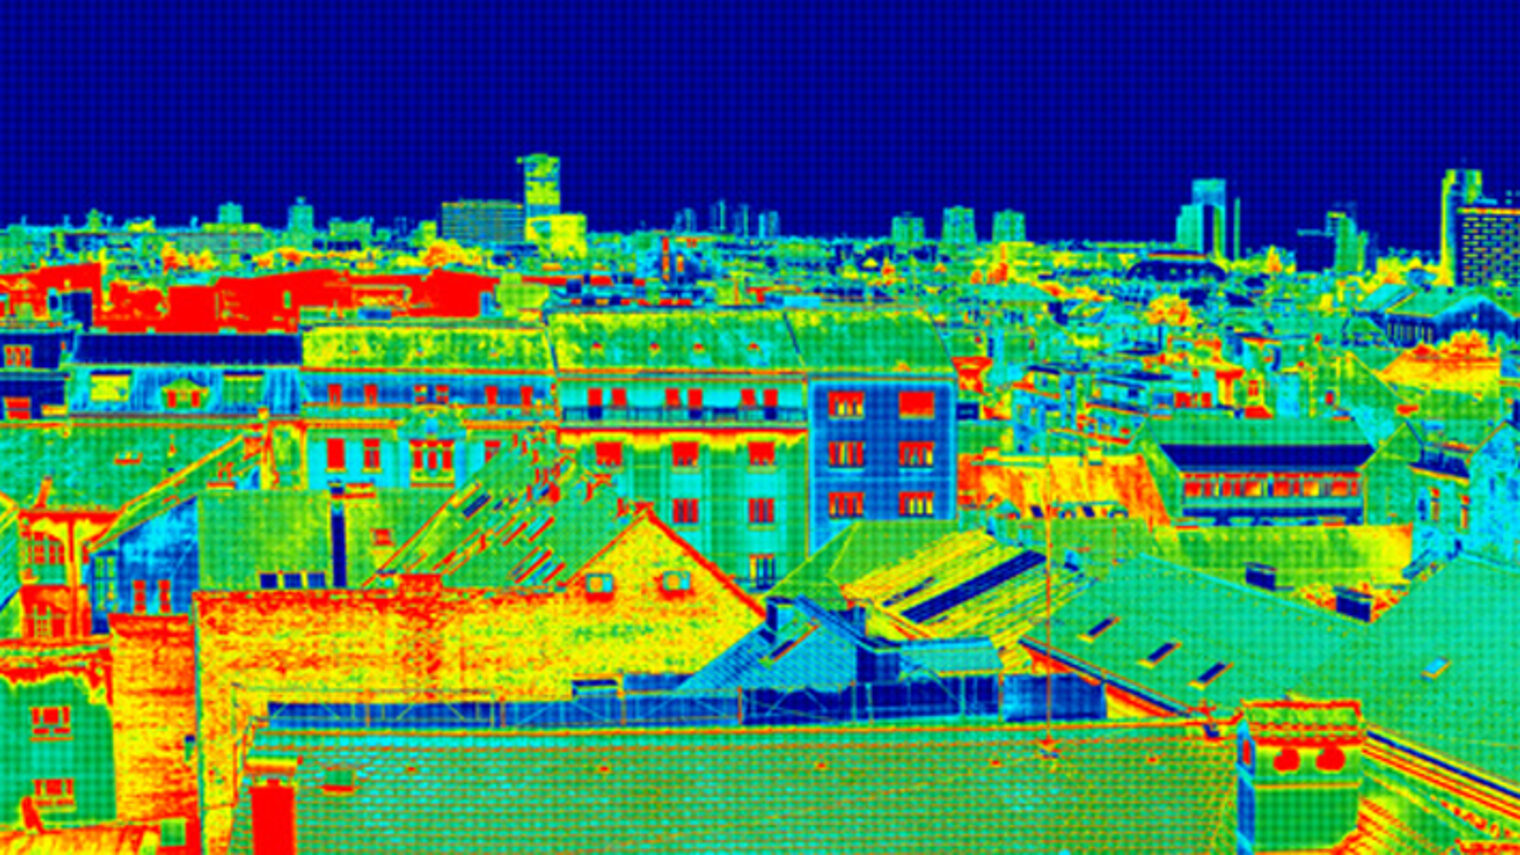 Infrared thermovision image panorama of Zagreb, showing difference temperature Schlagwort(e): thermal, camera, building, thermogram, loss, scan, household, display, test, recording, thermal imaging, thermal image, heat, radiation, temperature, analysis, ir, technology, energy, consumption, property, ecology, thermometer, emission, warmth, image, structure, measure, comparison, efficiency, detection, heat loss, architecture, investigation, thermography, house, thermovision, infrared, insulation, exterior, city, zagreb, building, facade